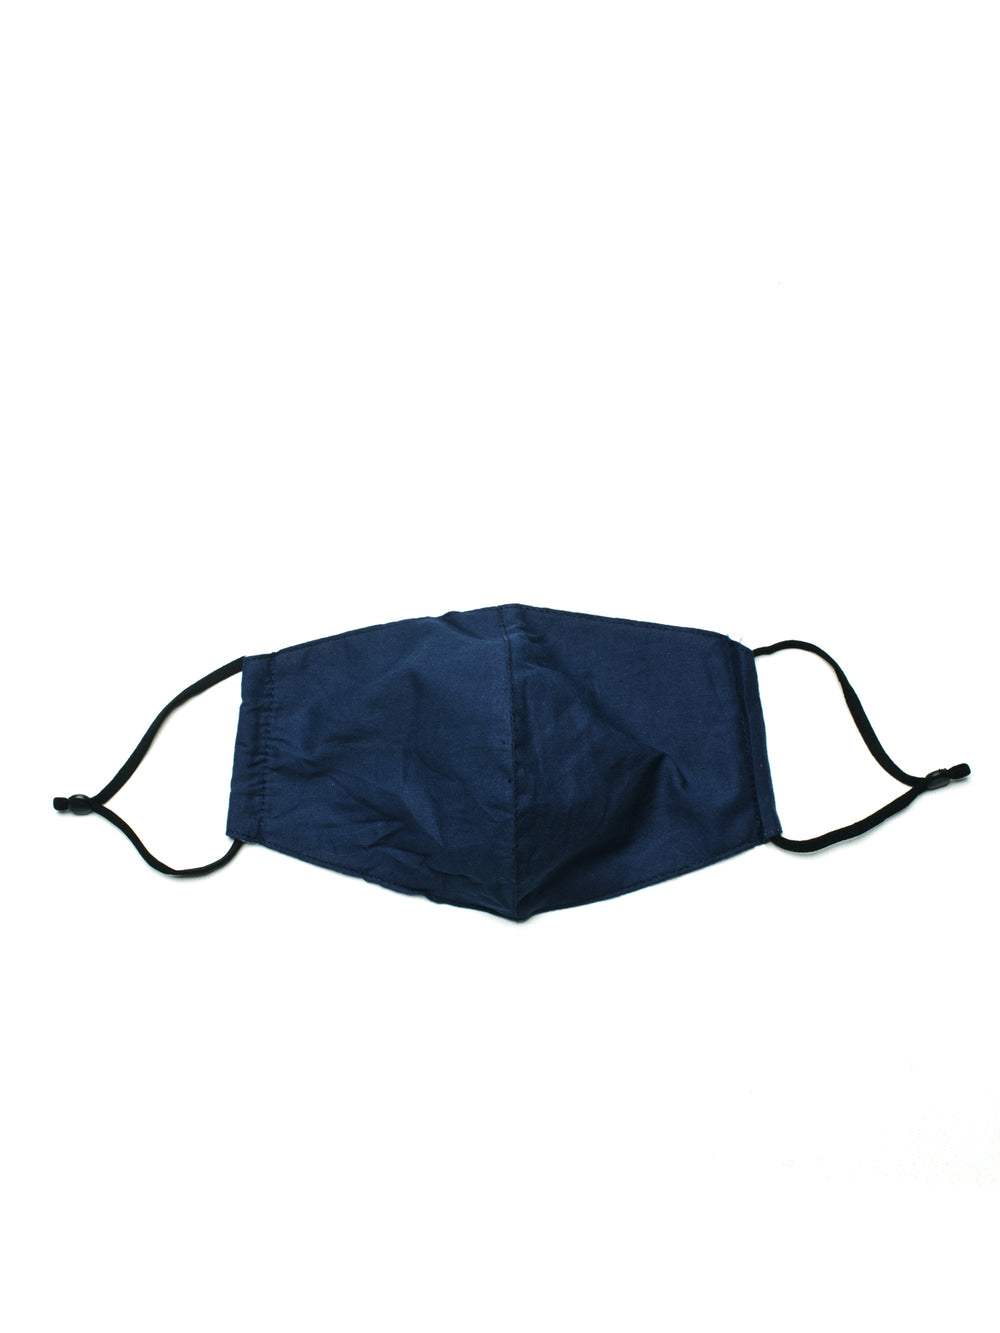 KW FASHION CORP SOLID MASK - NAVY - CLEARANCE